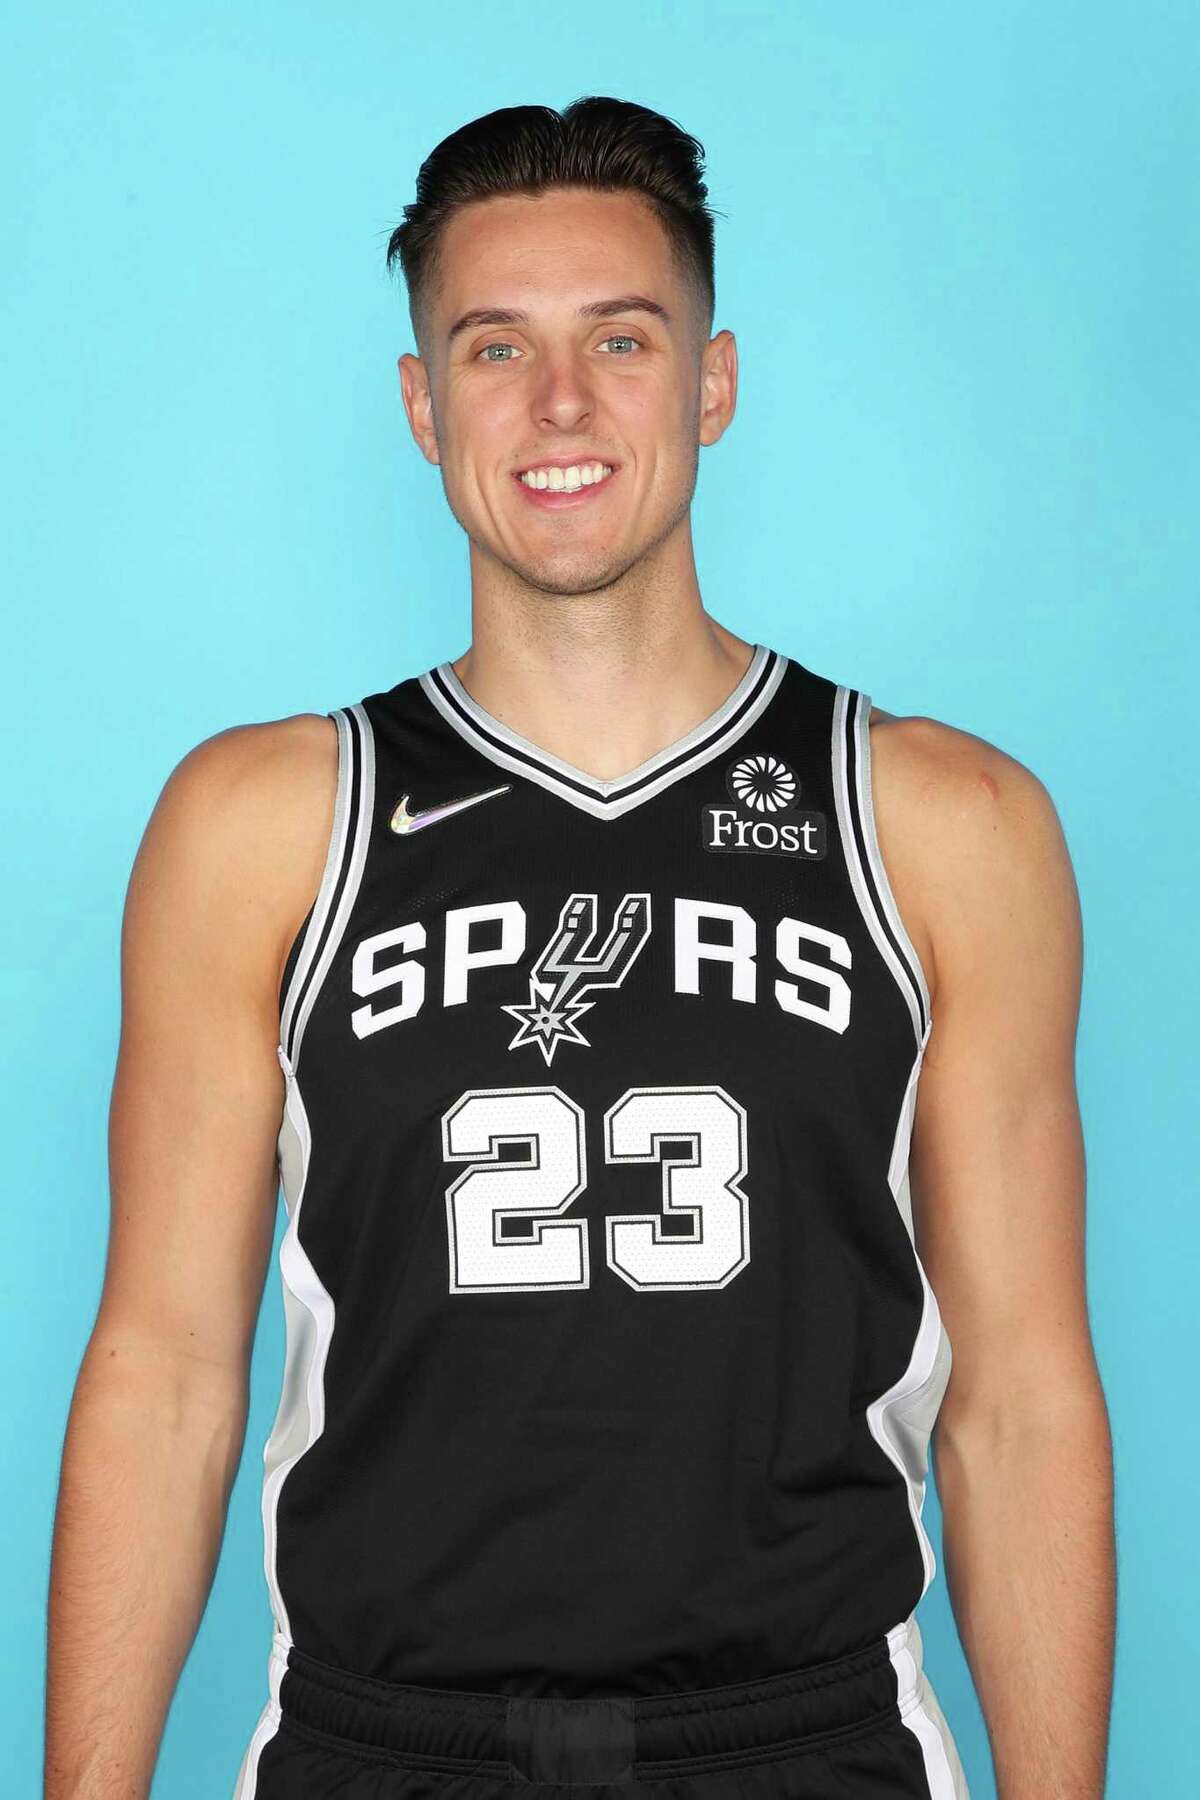 SAN ANTONIO, TX - SEPTEMBER 27: Zach Collins #23 of the San Antonio Spurs poses for a head shot at NBA Media Day on September 27, 2021 at AT&T Center in San Antonio, Texas. NOTE TO USER: User expressly acknowledges and agrees that, by downloading and or using this Photograph, user is consenting to the terms and conditions of the Getty Images License Agreement. Mandatory Copyright Notice: Copyright 2021 NBAE (Photo by Michael J. LeBrecht II/NBAE via Getty Images)